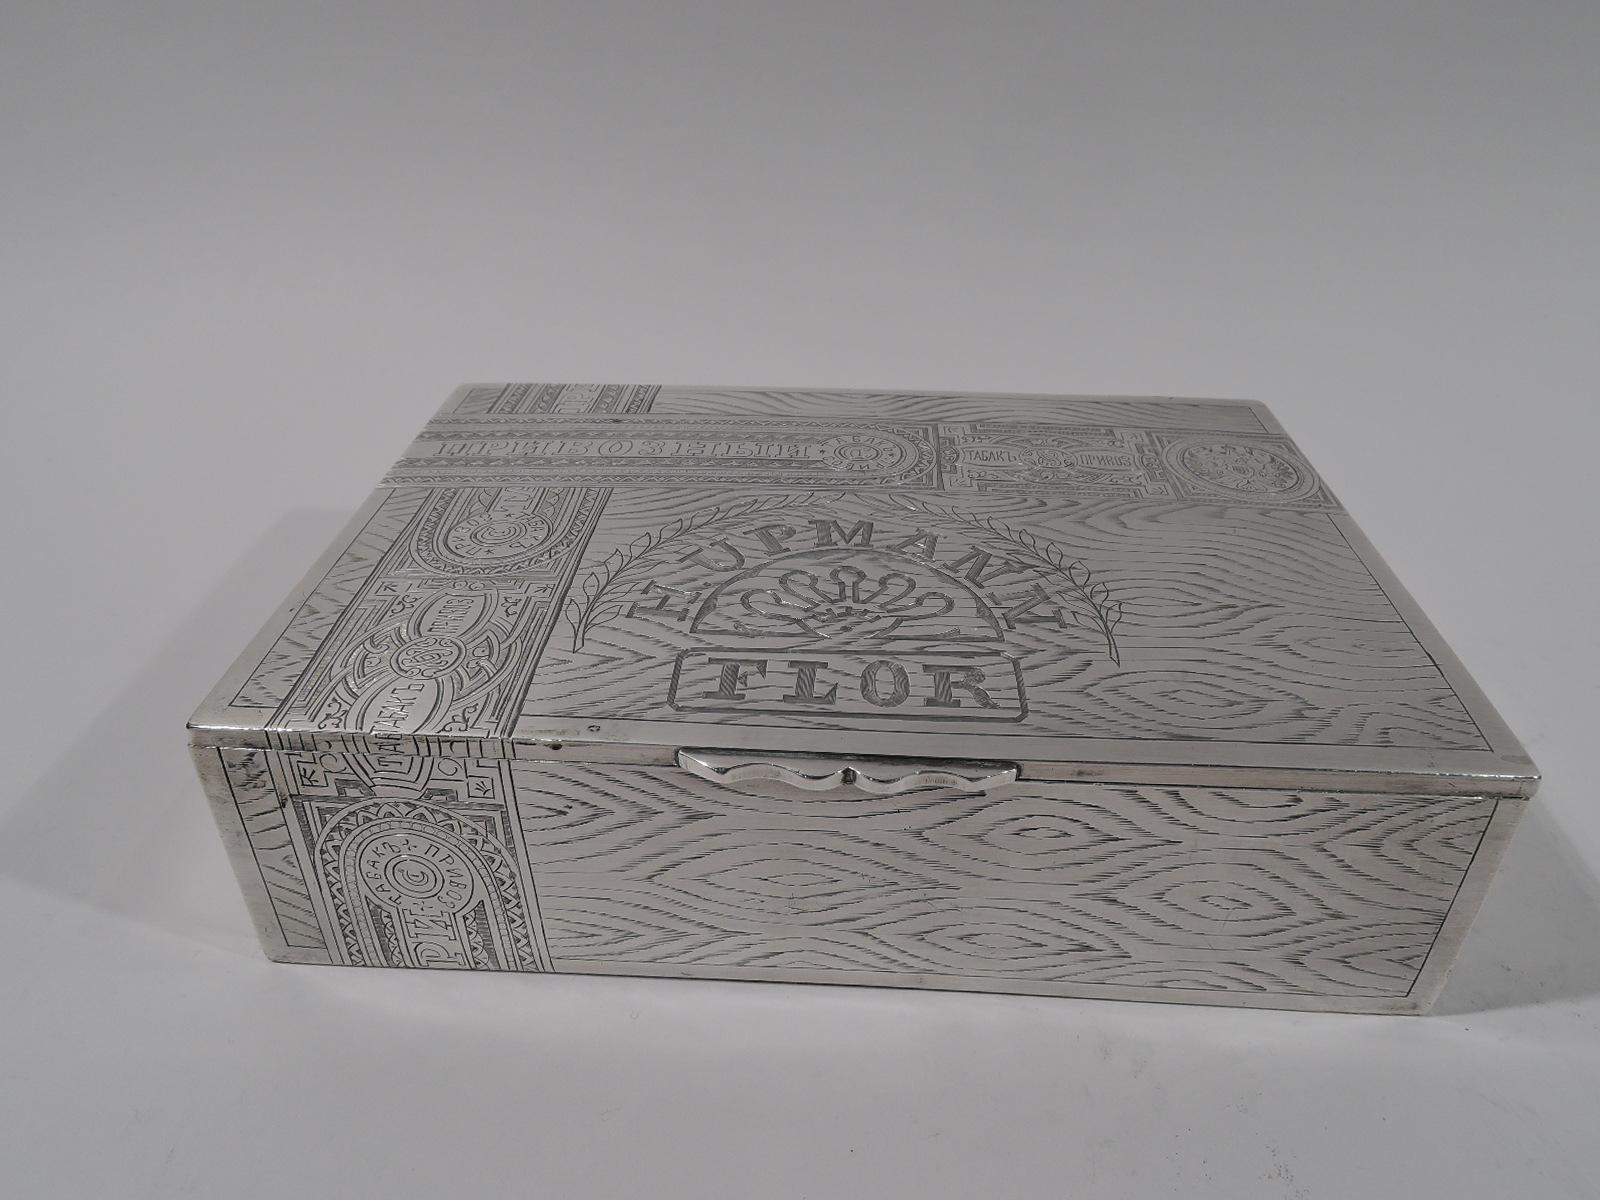 Russian 875 silver novelty cigar box, circa 1910. Rectangular; cover flat and hinged with scrolled tab. Trompe l’oeil wood panels with realistic grain and tax stamps. Box interior gilt-washed. On cover interior is engraved Russian script